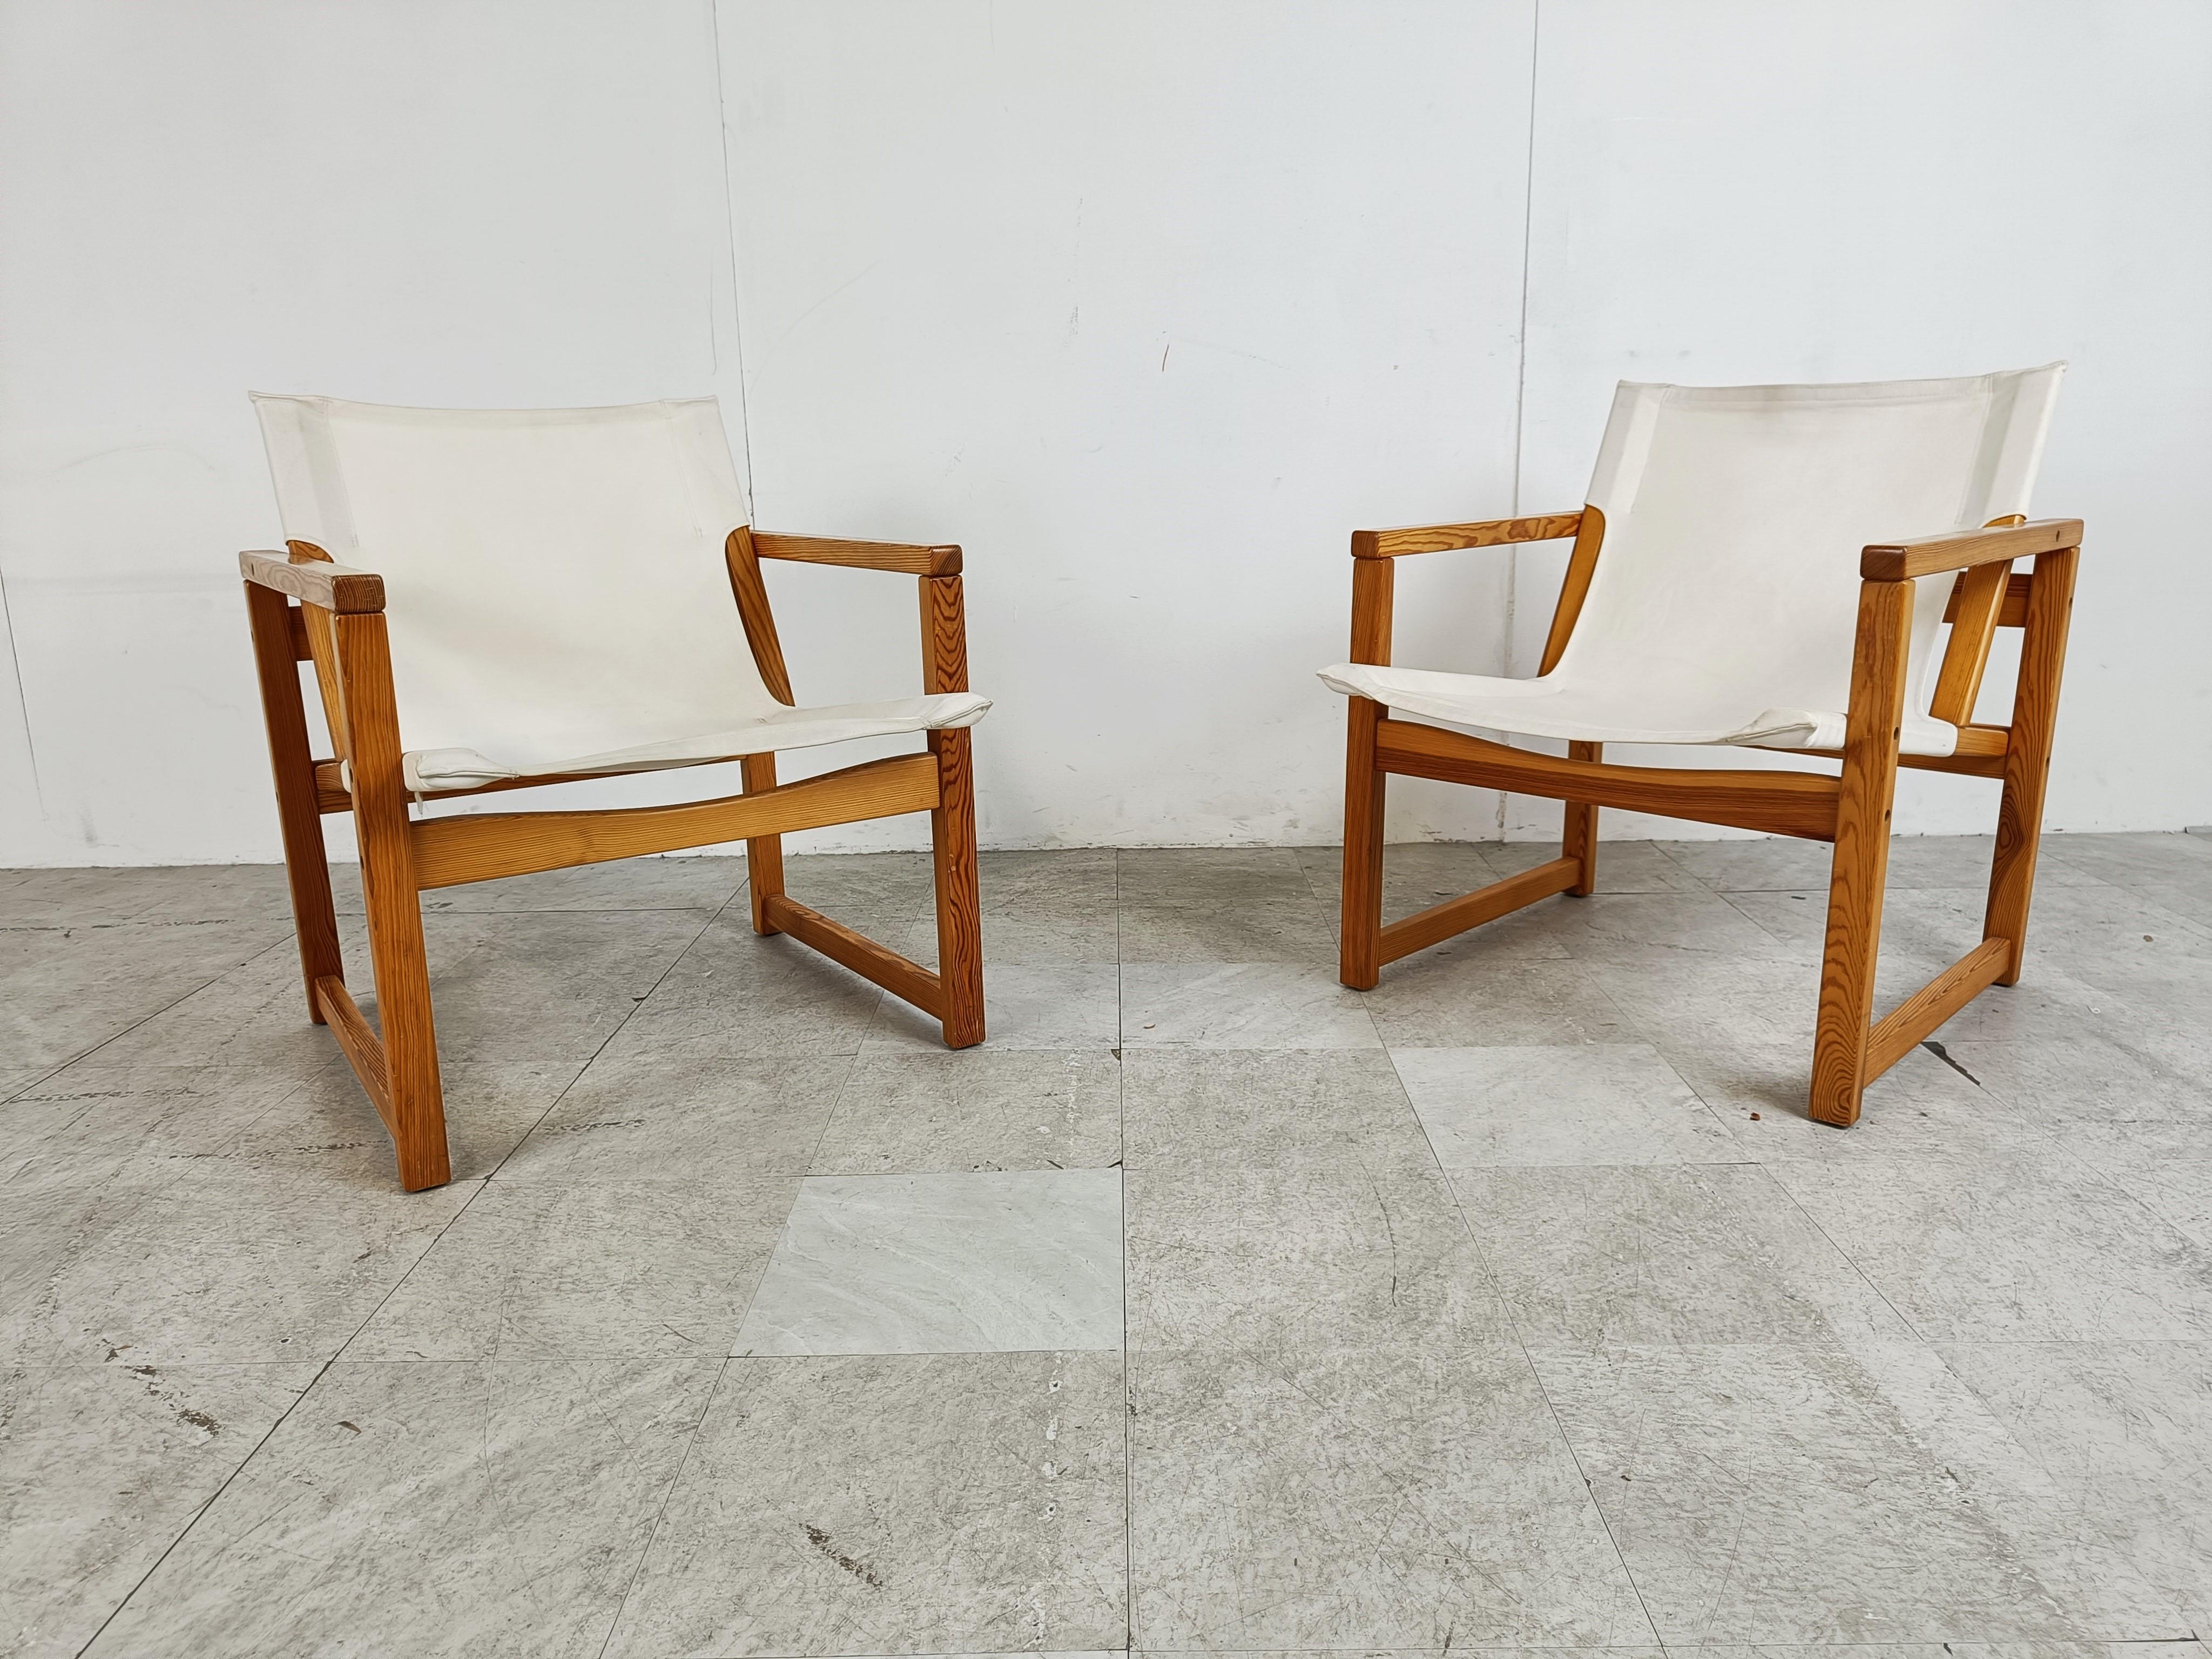 Swedish Vintage Safari Chairs by Tord Bjorlund for Ikea, 1980s